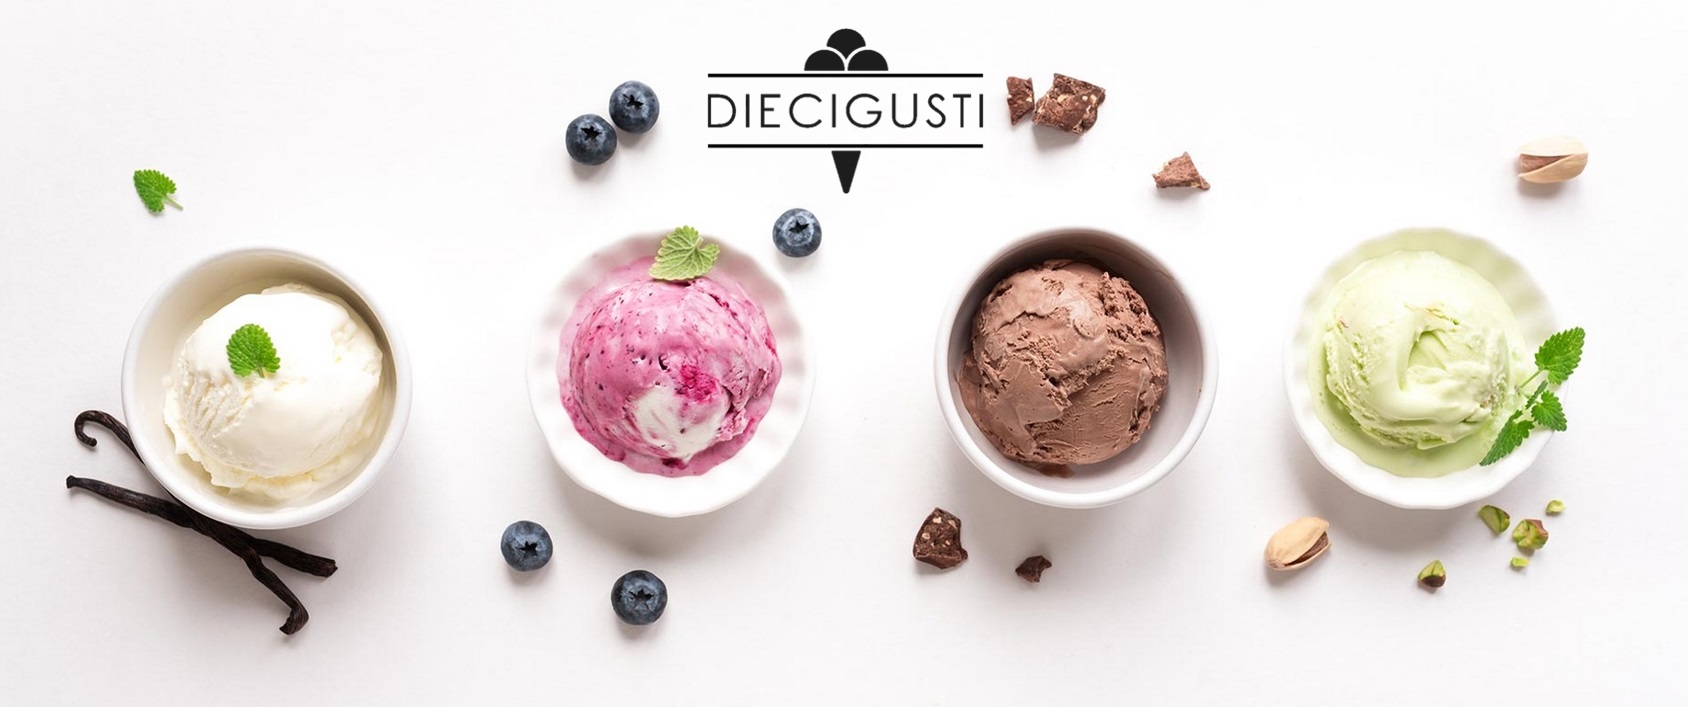 Diecigusti logo and photos of four different flavours of ice cream in small bowls with fresh ingredients scattered around them